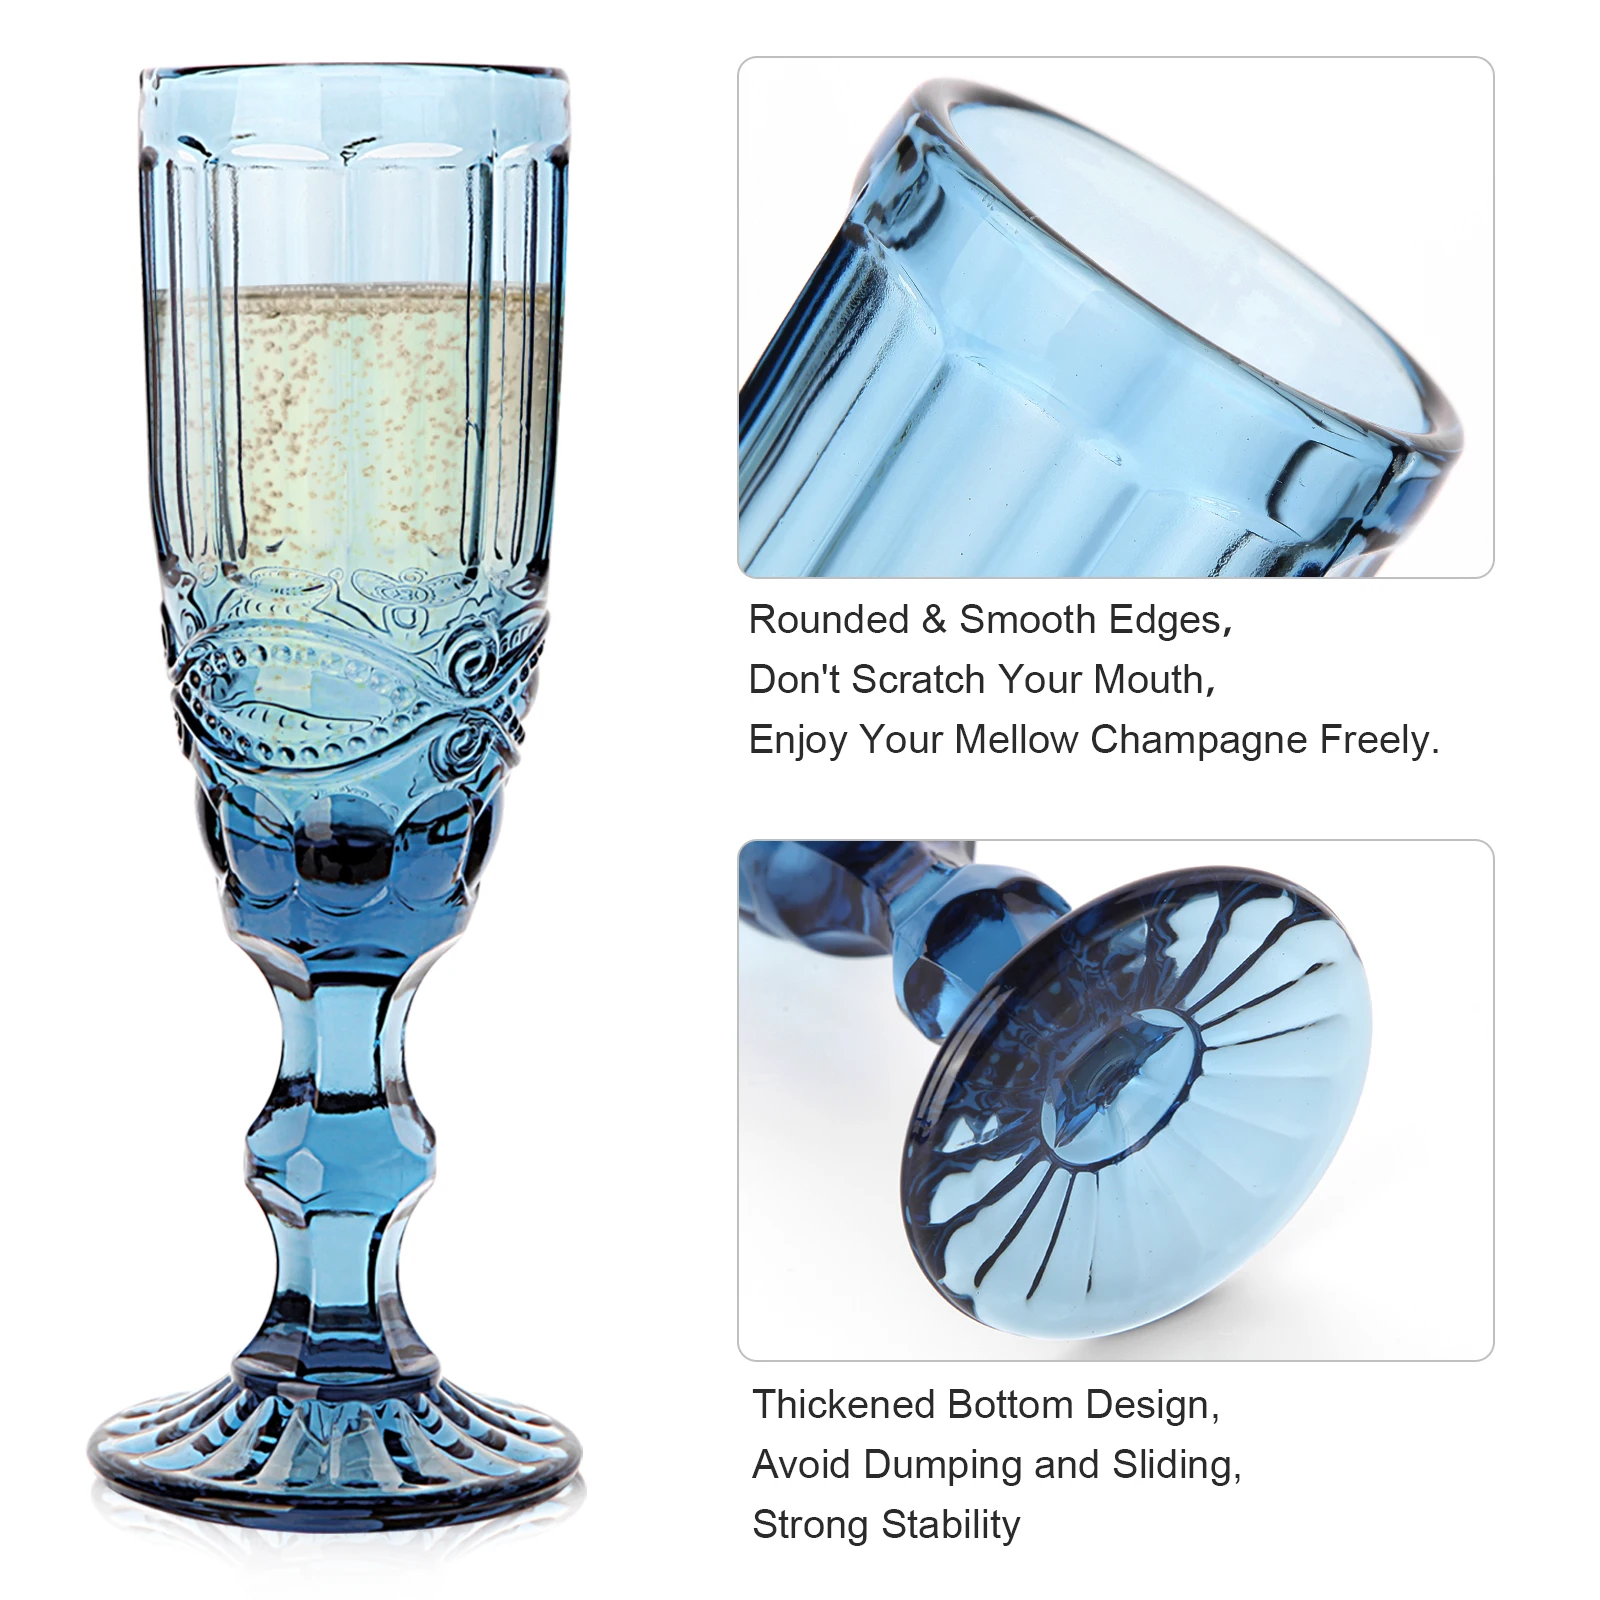 https://ae01.alicdn.com/kf/H3632ca291ea6443f927020a0a0a53ca8h/Champagne-Glasses-set-of-4-Cheers-Champagne-Flutes-5-oz-for-Wedding-Party-Anniversary-Christmas-Vintage.jpg